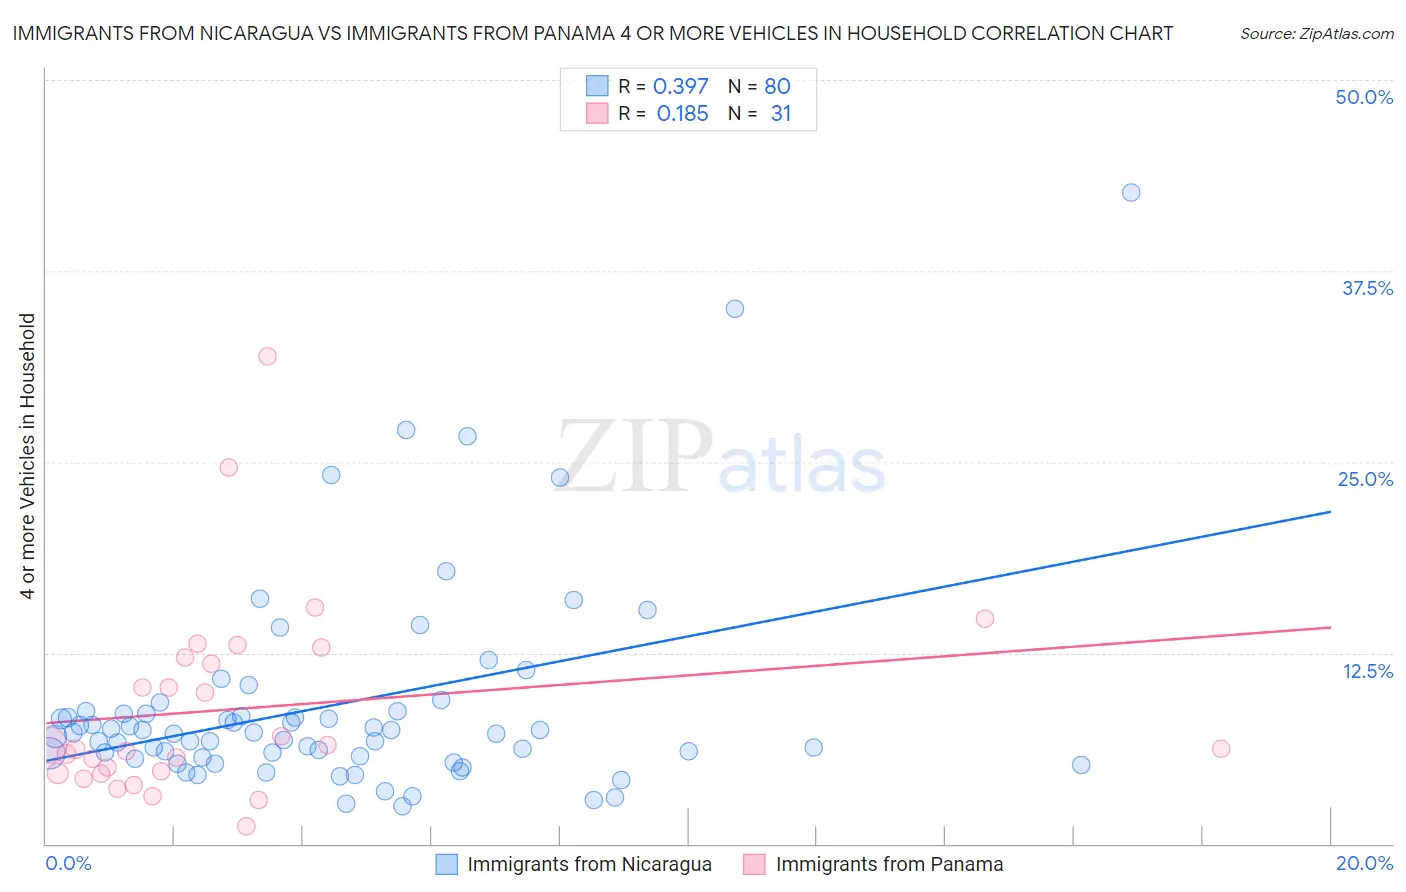 Immigrants from Nicaragua vs Immigrants from Panama 4 or more Vehicles in Household